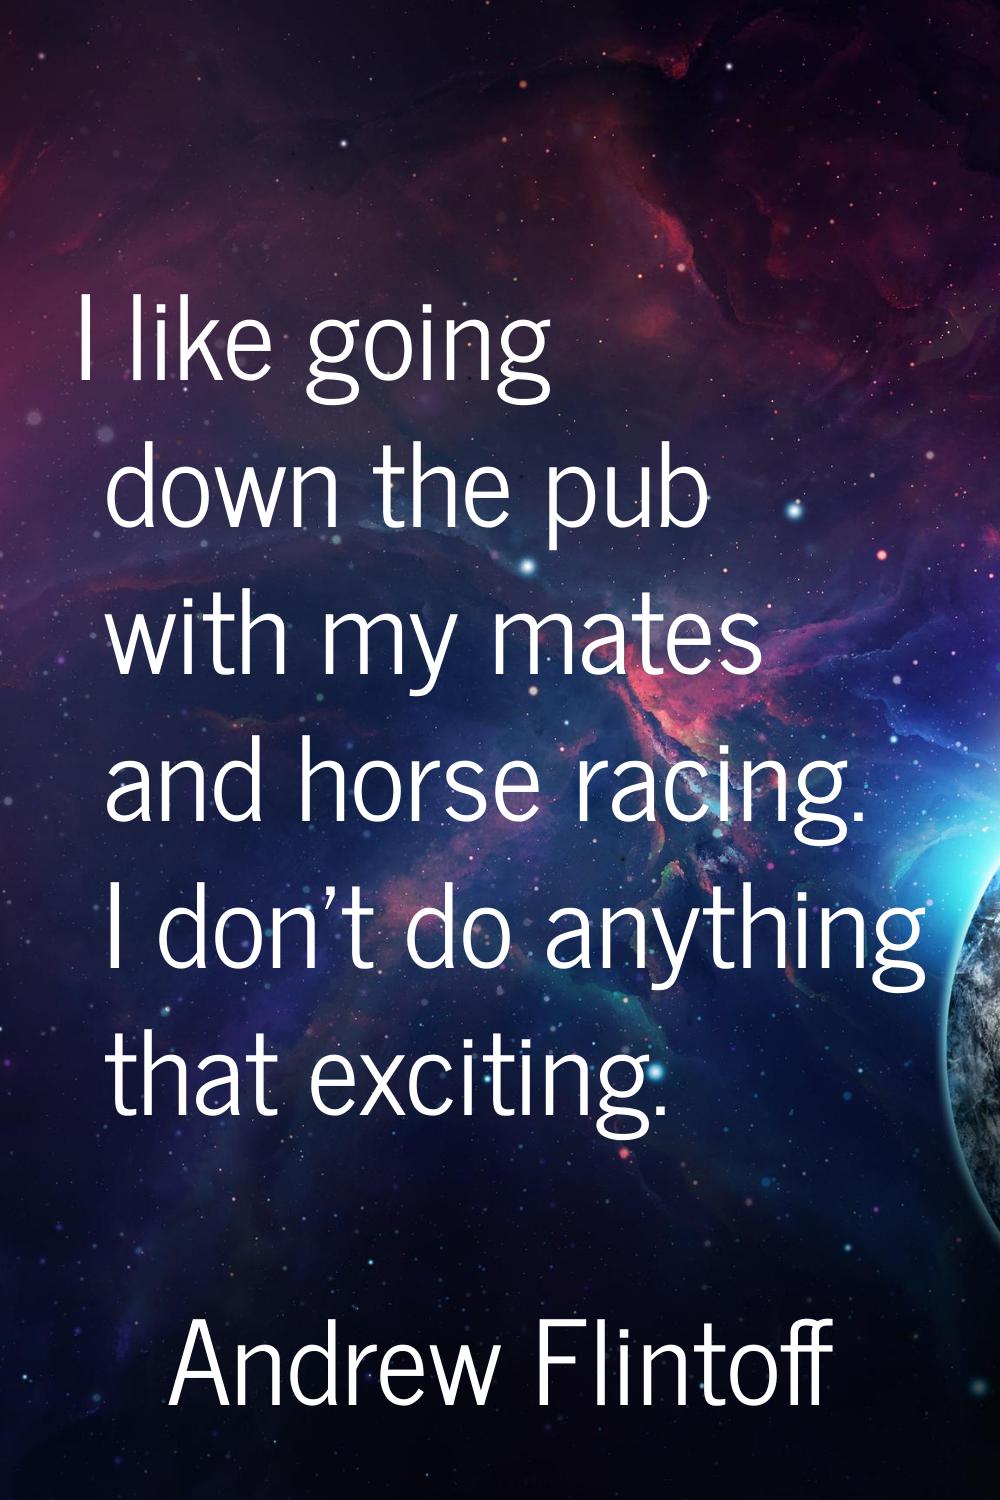 I like going down the pub with my mates and horse racing. I don't do anything that exciting.